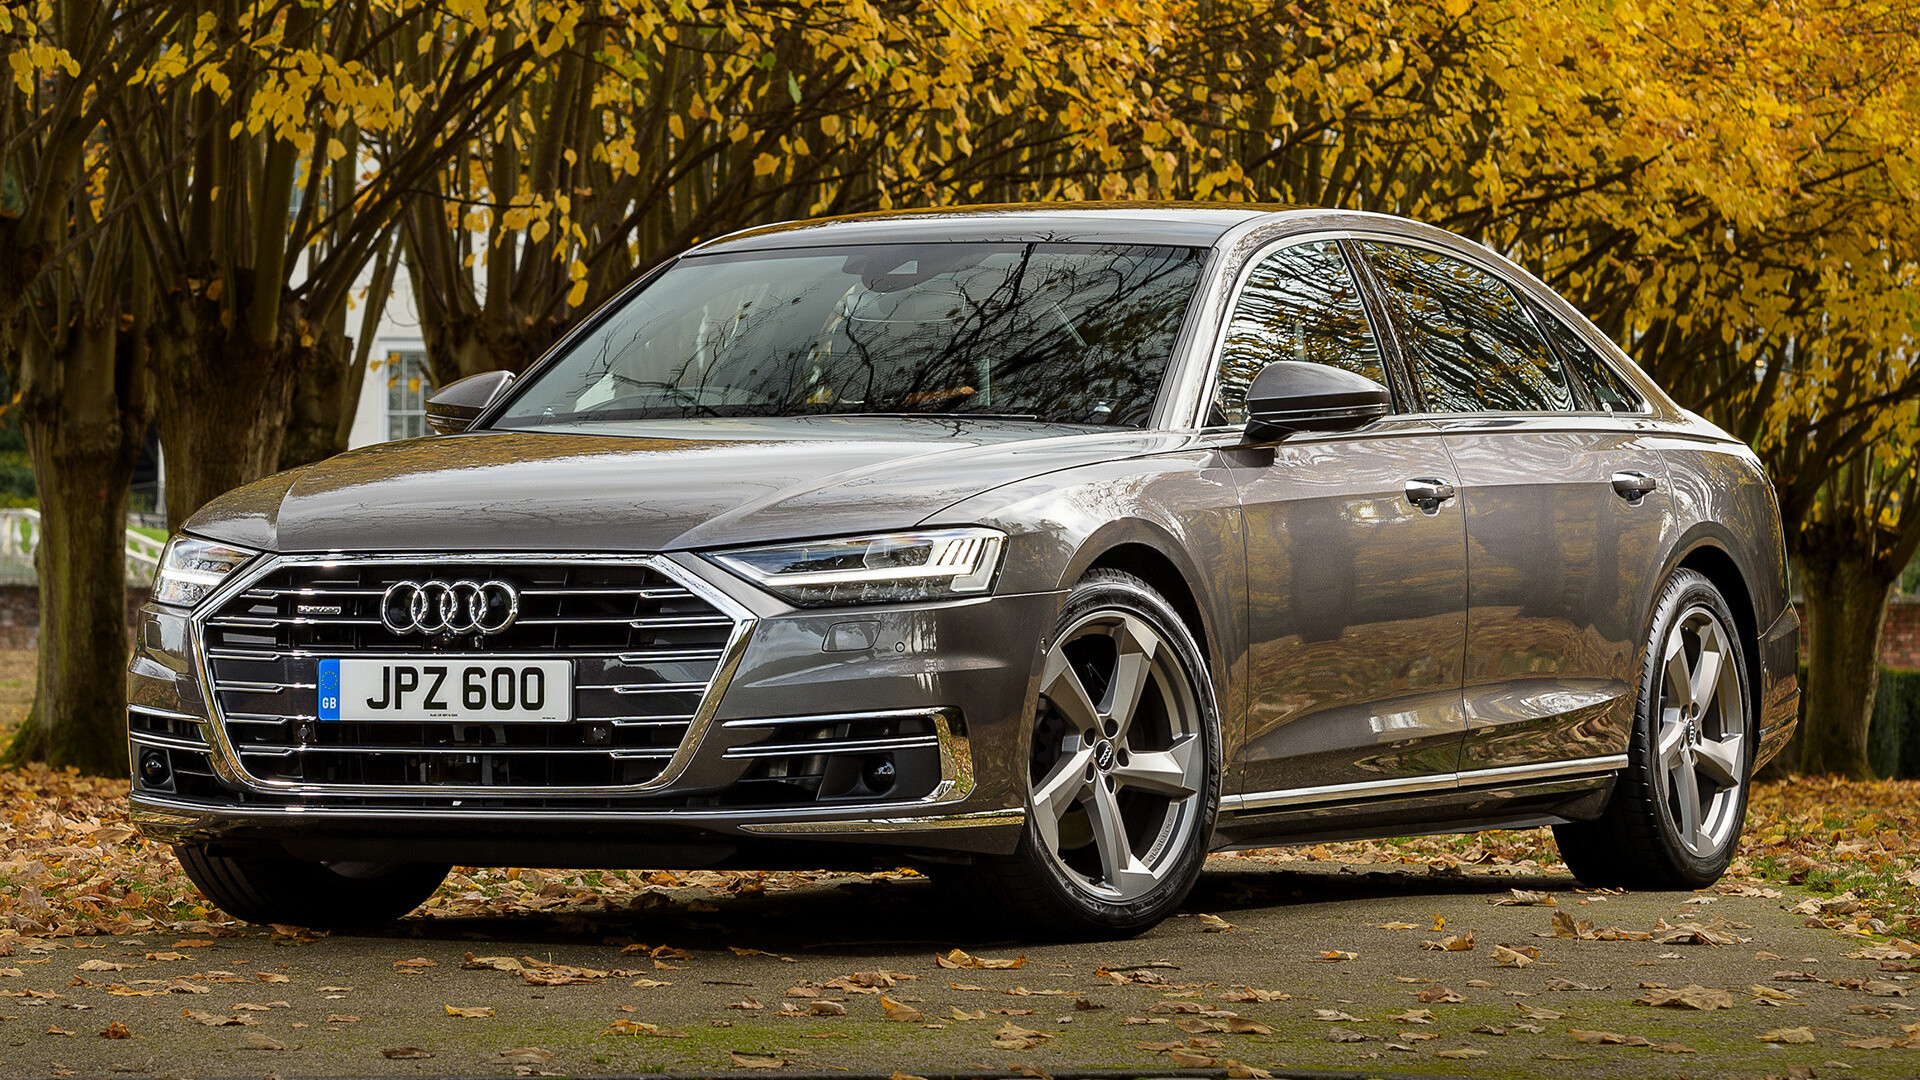 Audi A8: A full-size luxury sedan, Available in a number of variants and body types. 1920x1080 Full HD Wallpaper.